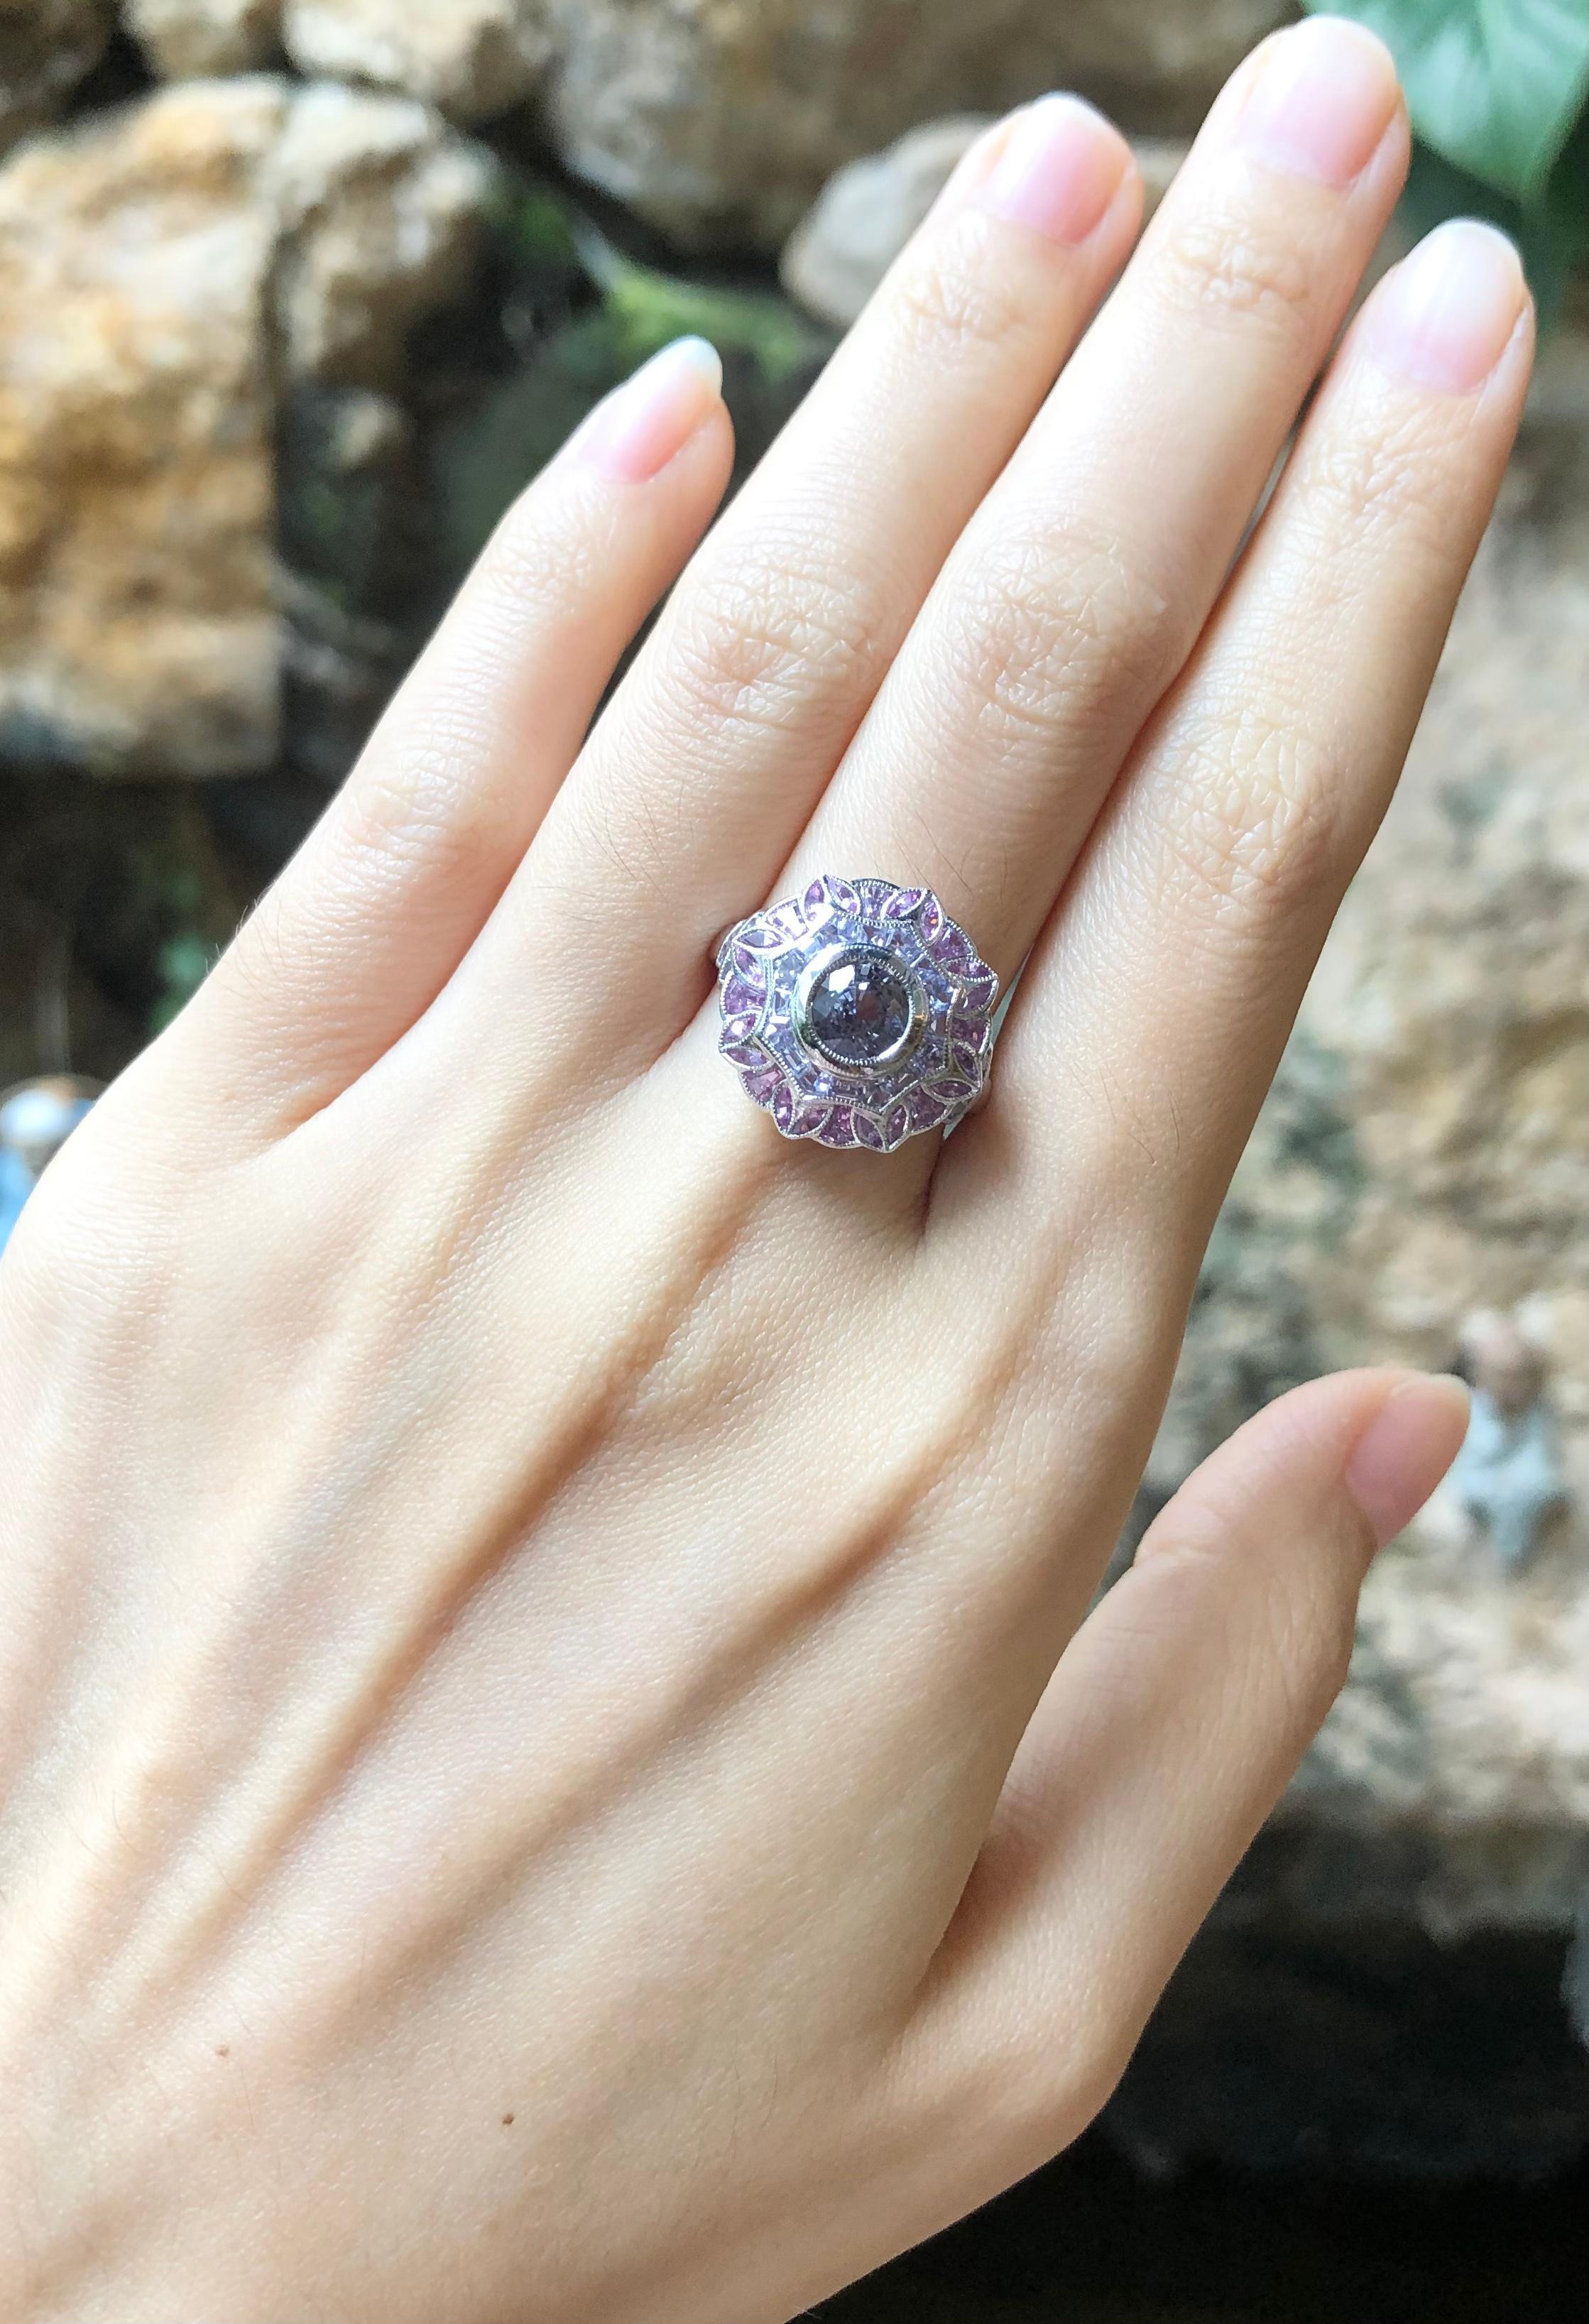 Purple Sapphire 1.52 carats (center) with Pink Sapphire 1.59 carats and Purple Sapphire 1.96 carats Ring set in 18 Karat White Gold Settings

Width:  1.6 cm 
Length: 1.6 cm
Ring Size: 54
Total Weight: 7.91 grams

